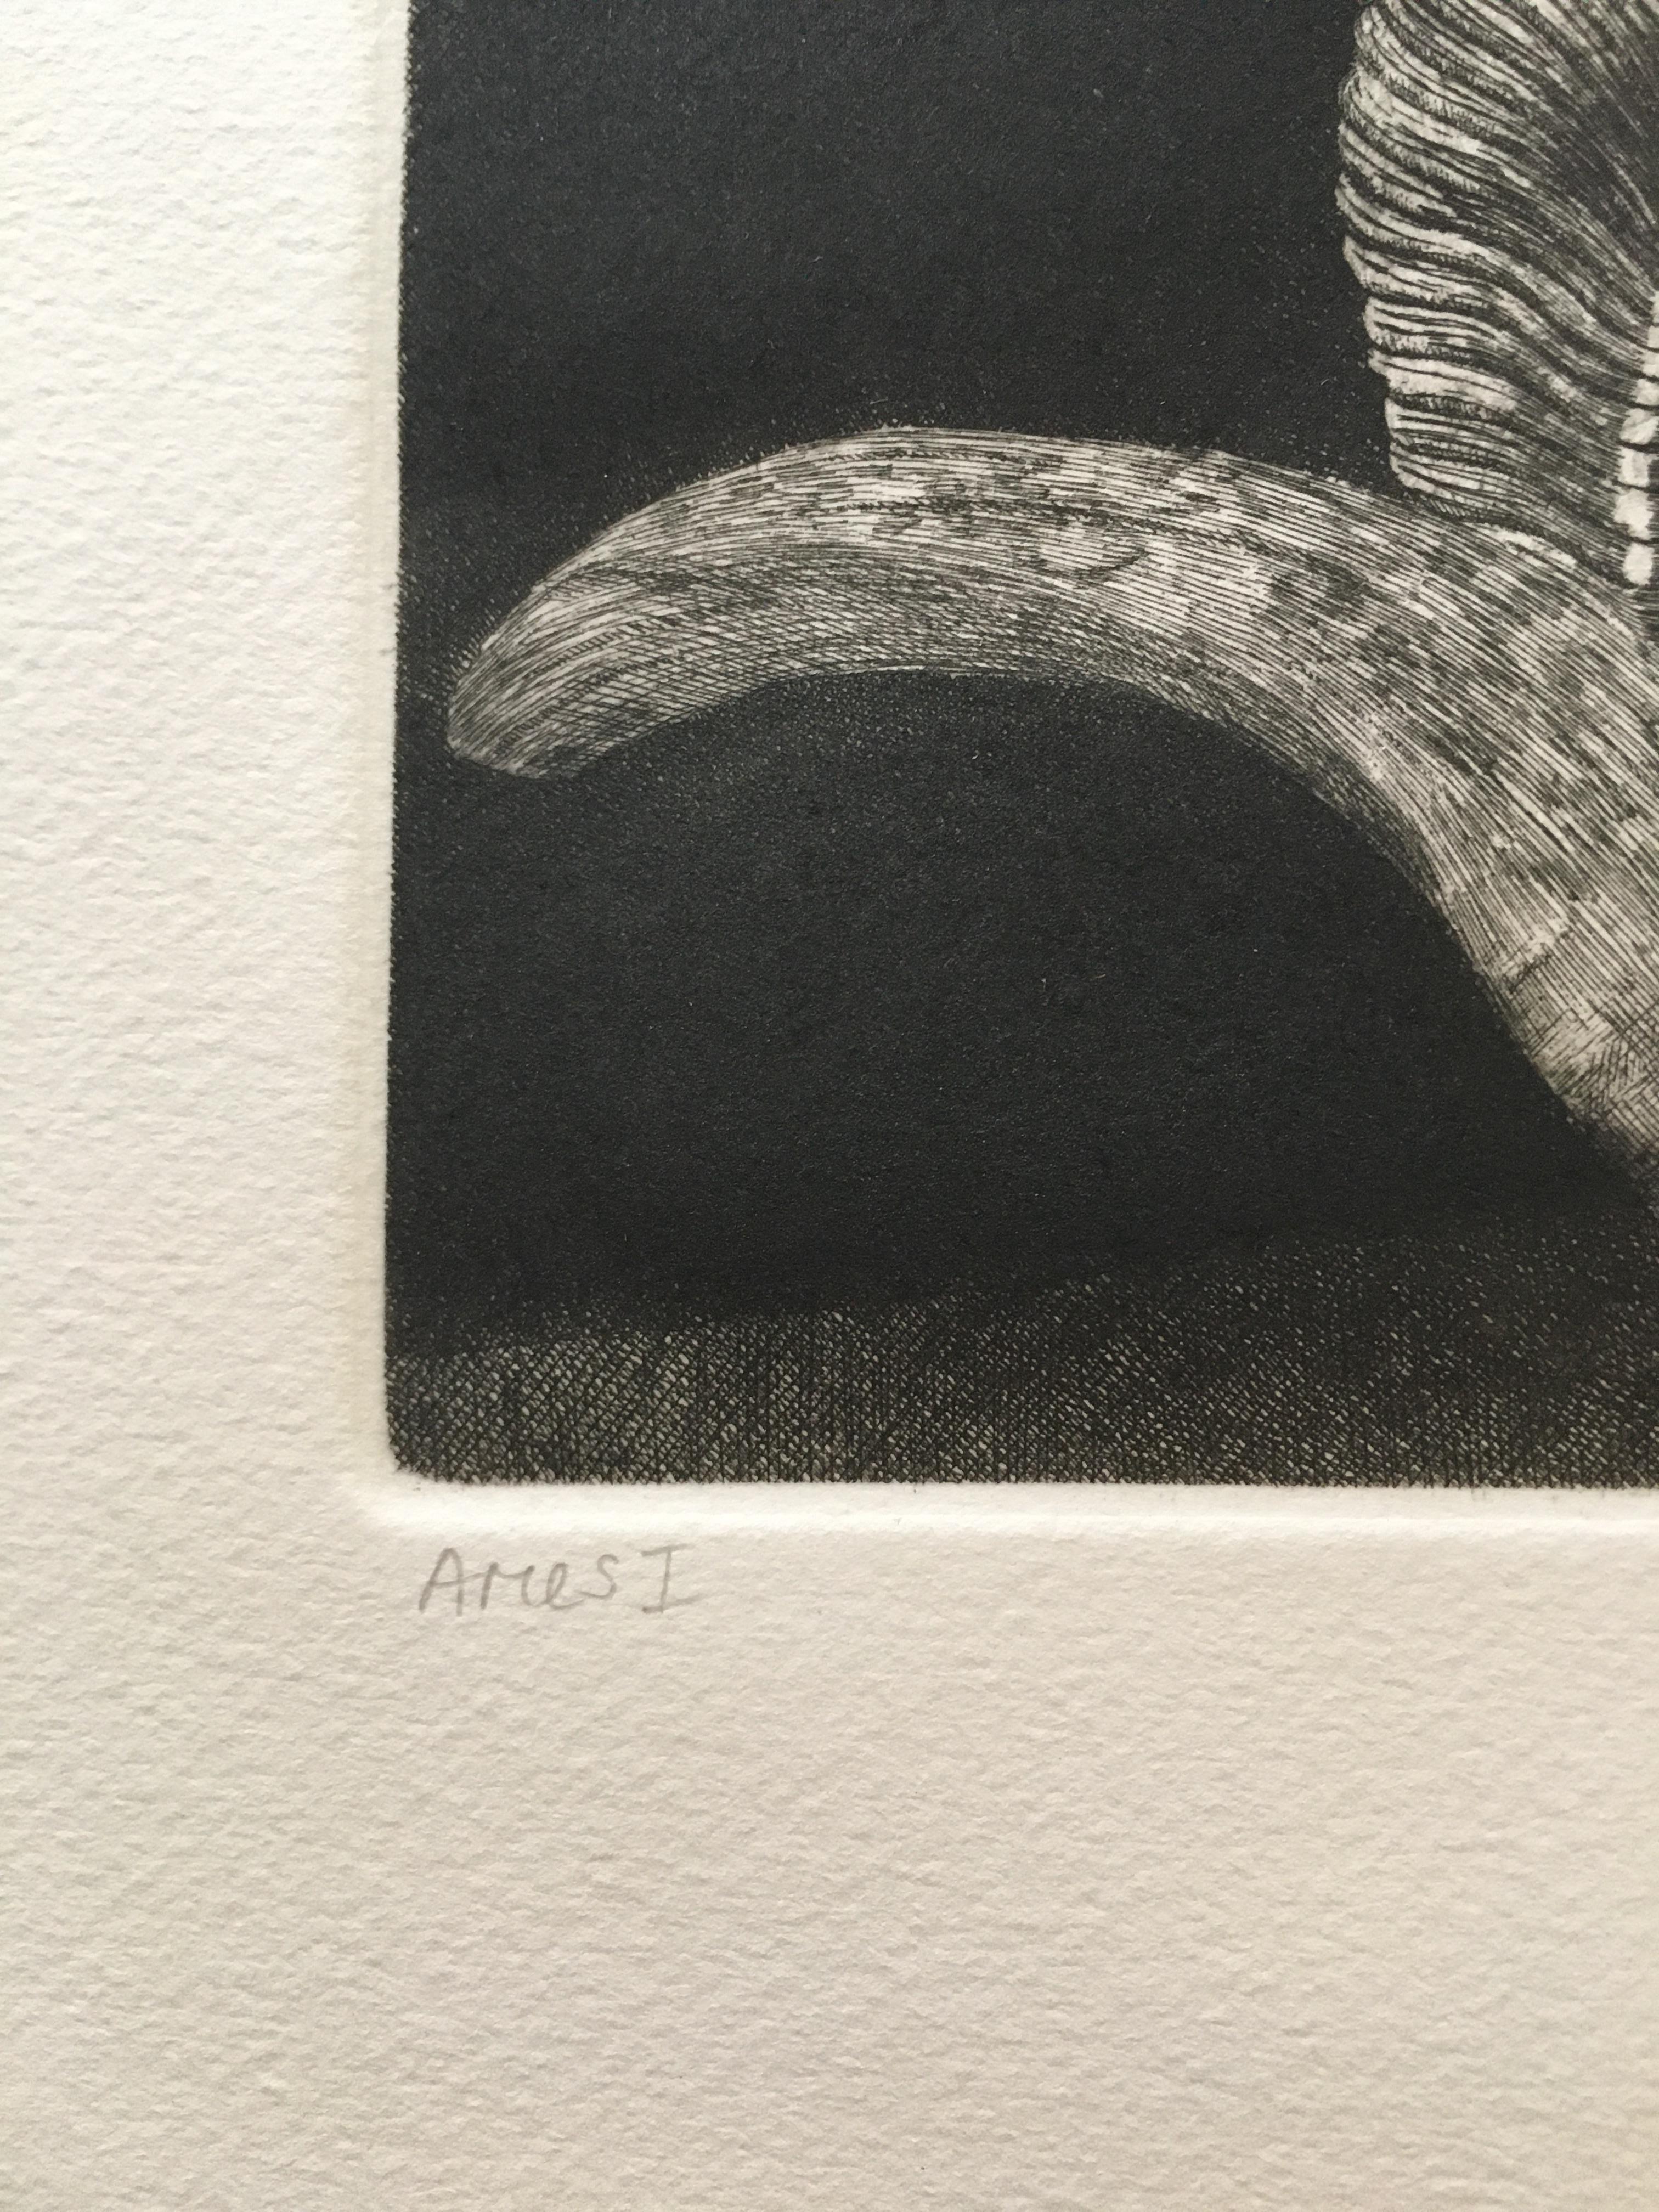 Elizabeth Quandt (1922 - 1994)
Aries I, 1978
Etching on Arches paper
Singed and dated in pencil, lower right
Edition IX/L (9/50)
With artist's embossed stamp to lower center
Image 5in x 11in: Sheet 22 1/4in H x 18in L. Unframed.
The ram's skull